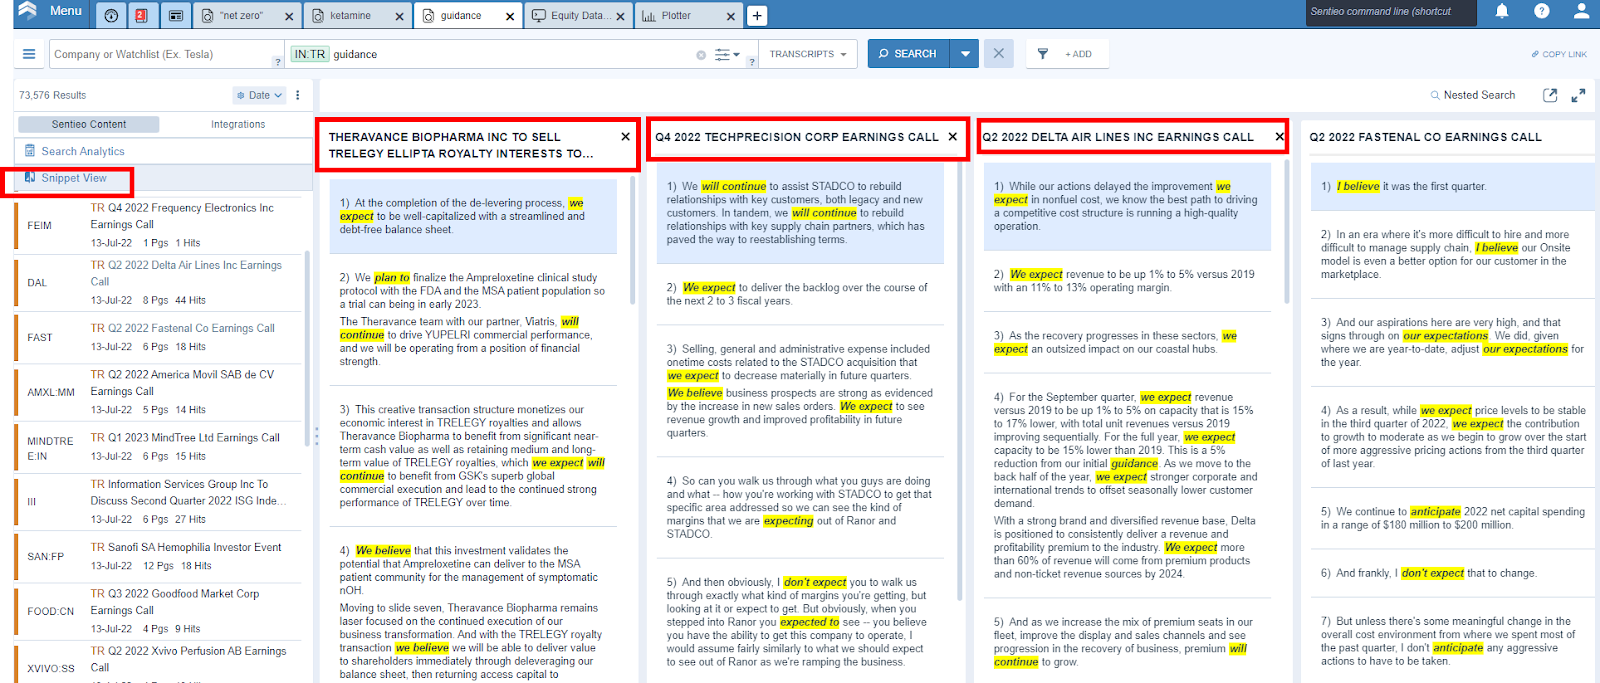 Read multiple documents on one screen with Snippets view 